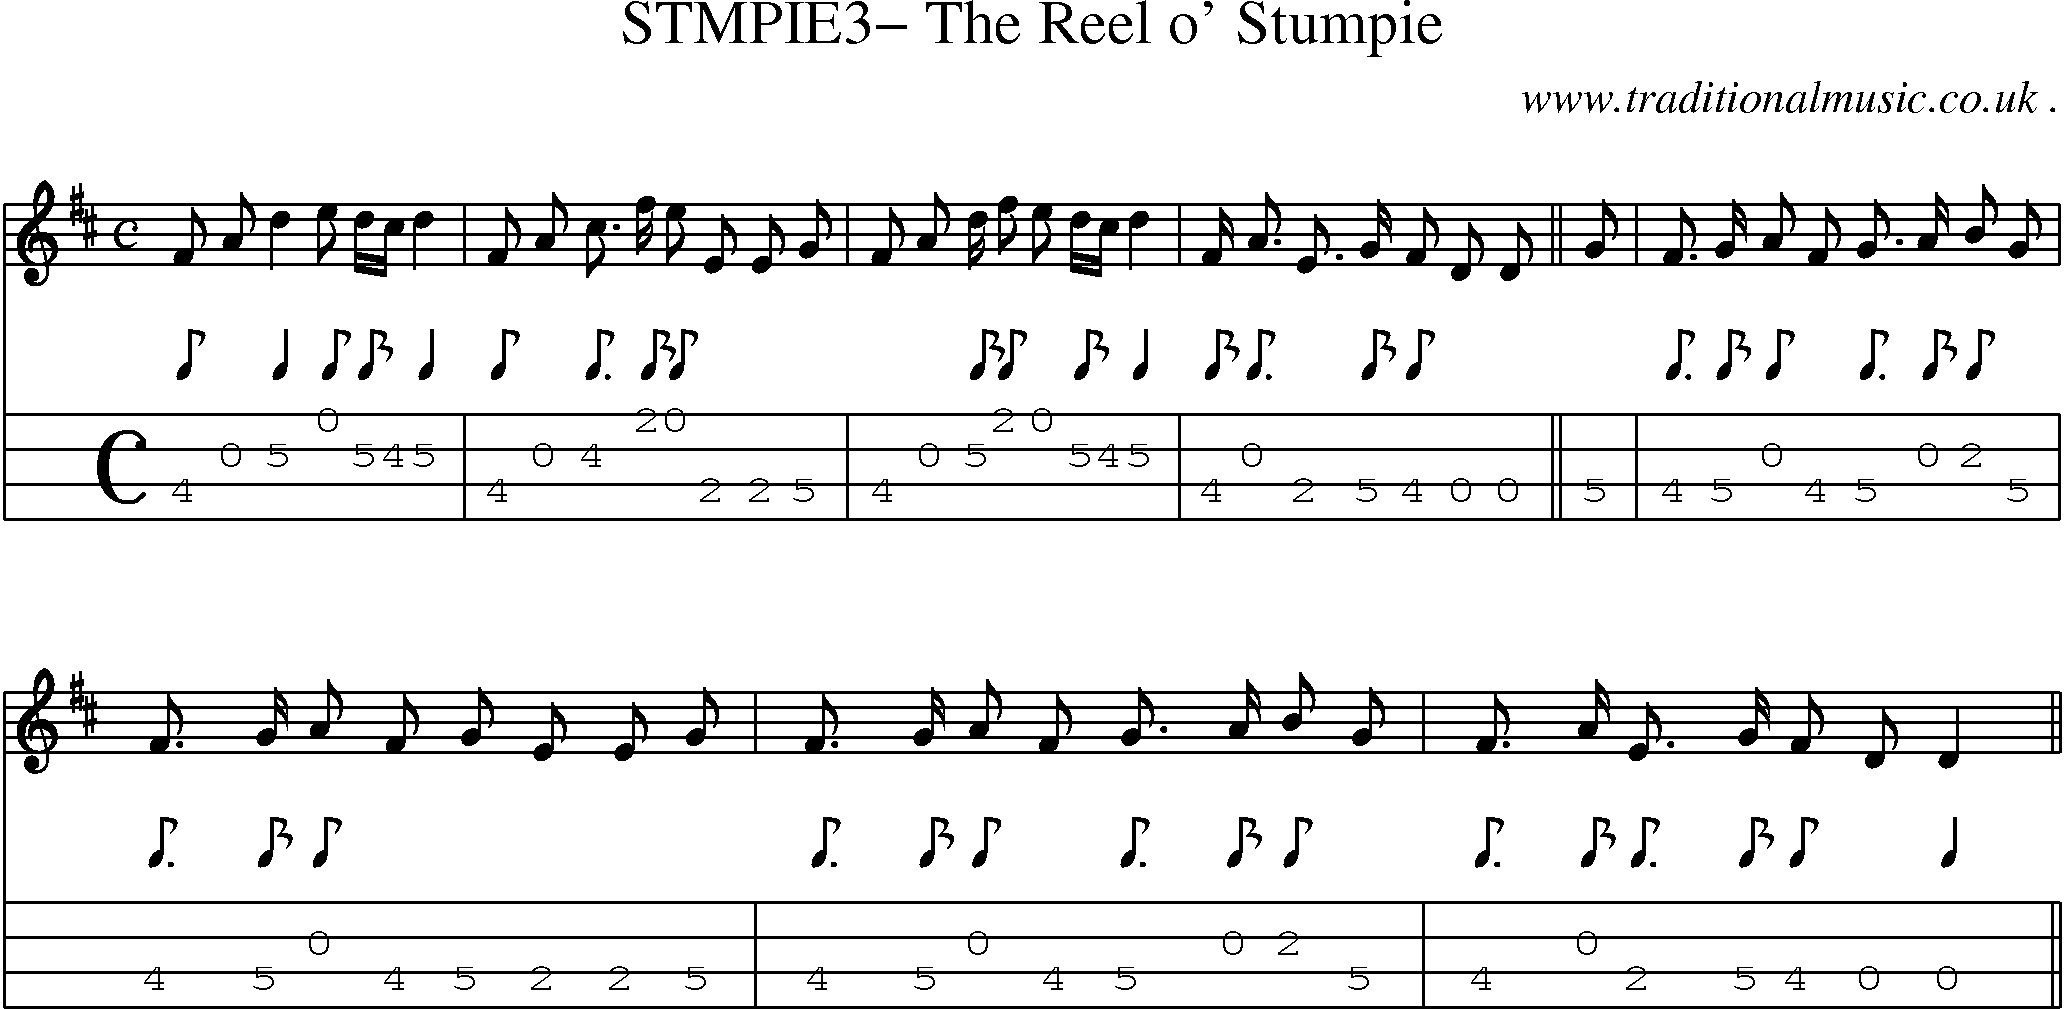 Sheet-Music and Mandolin Tabs for Stmpie3 The Reel O Stumpie